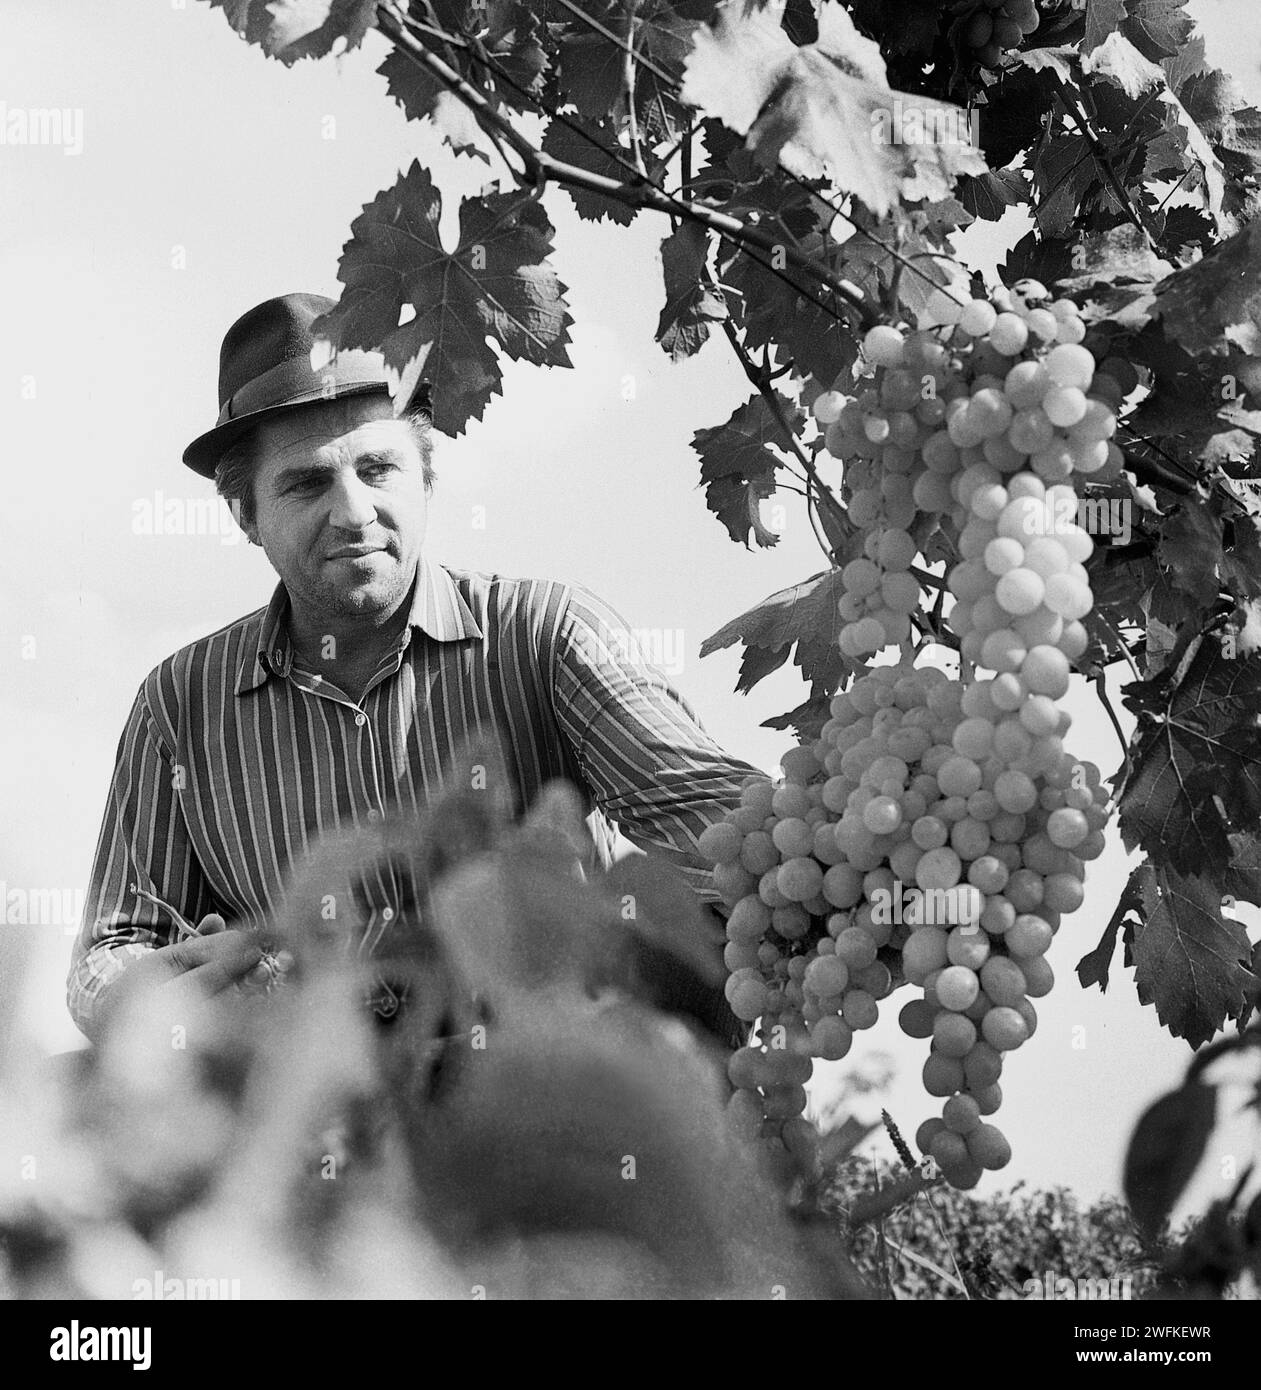 Vrancea County, Romania, approx. 1978. Man harvesting grapes in a vineyard. Stock Photo